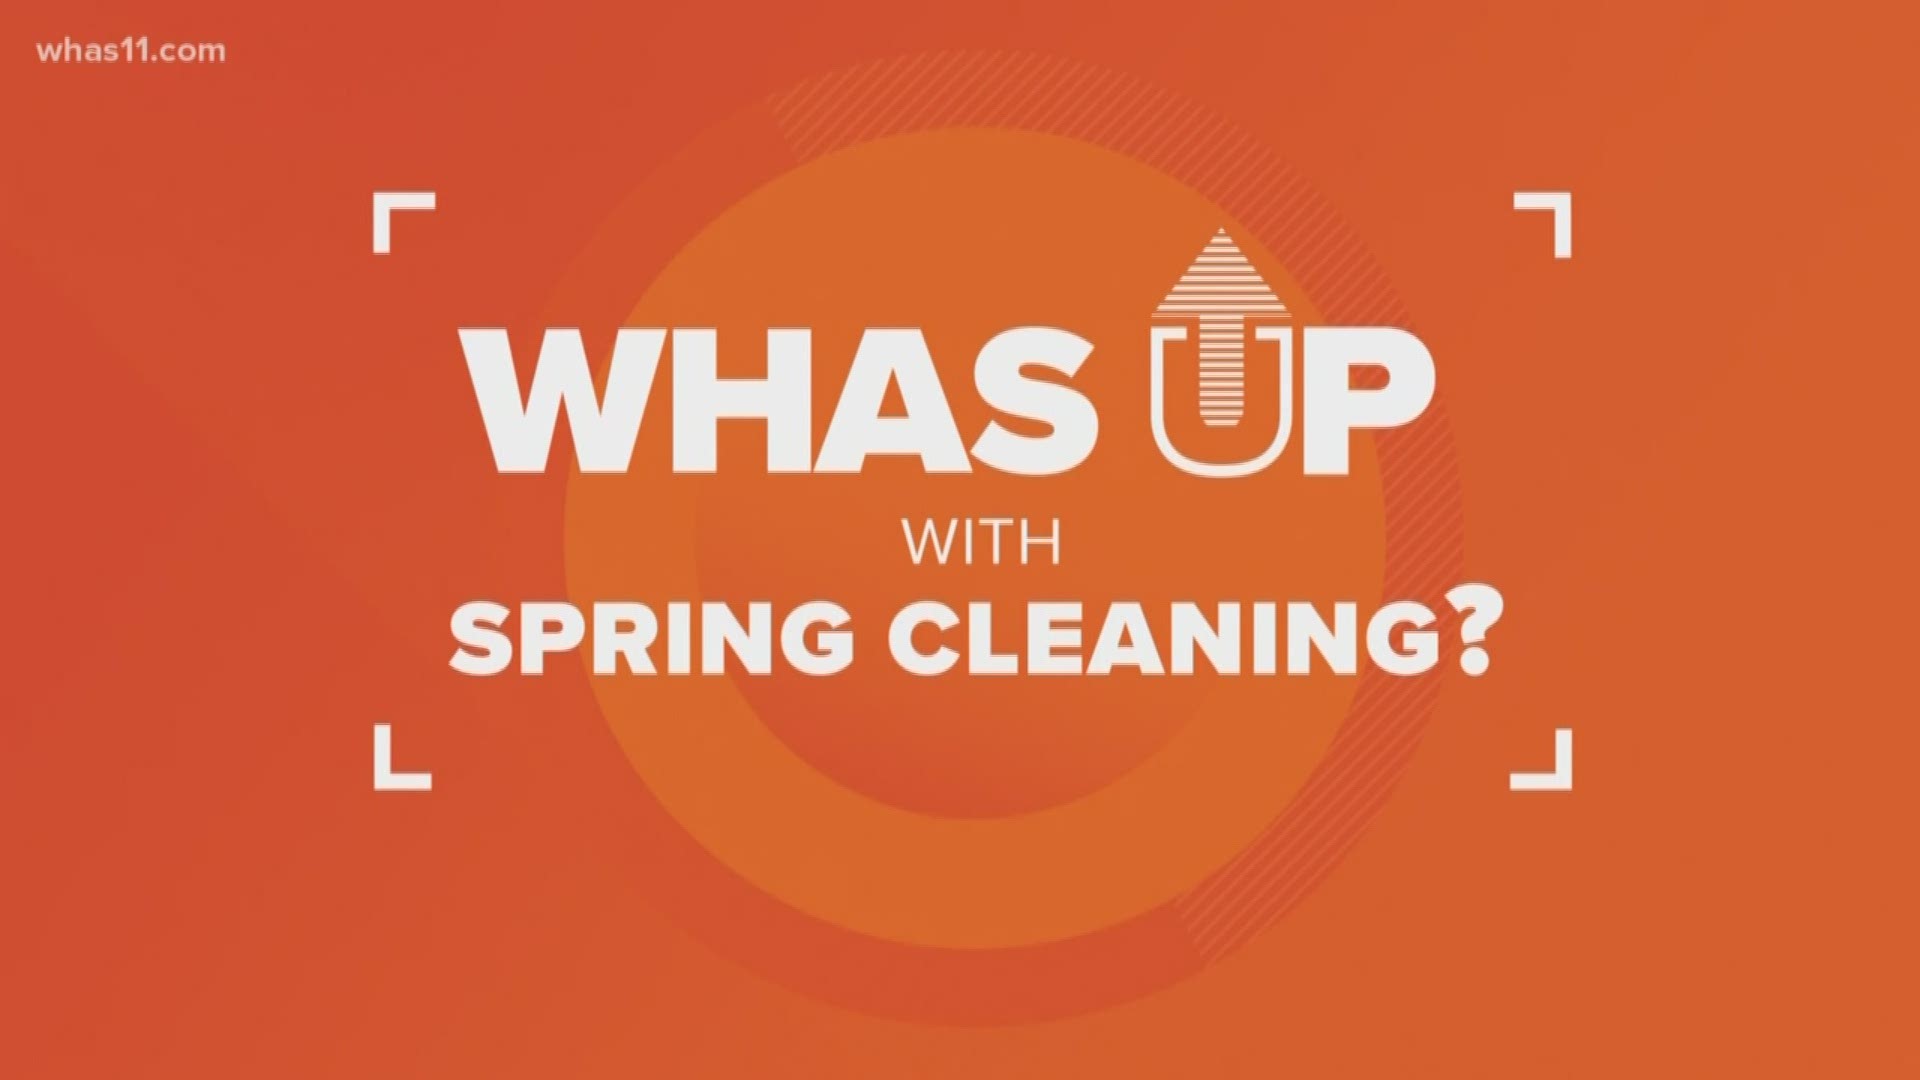 How did ‘spring cleaning’ become a thing?